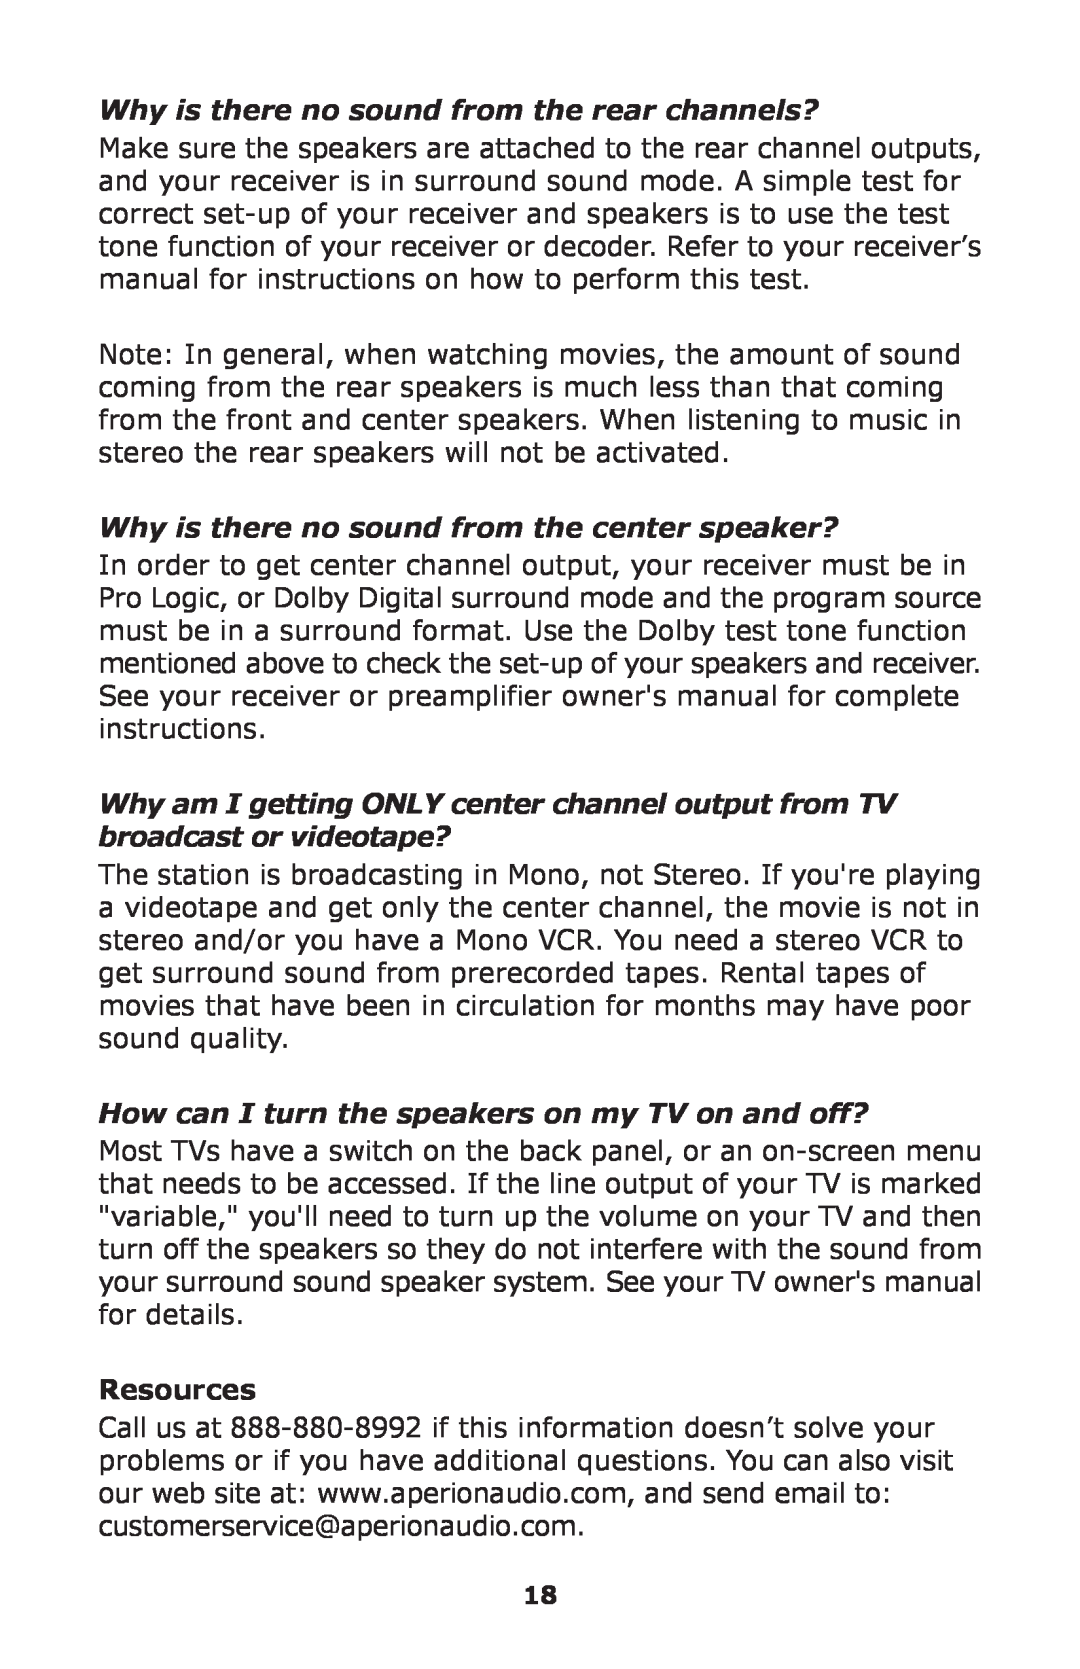 Aperion Audio SW-12, SW8-APR Why is there no sound from the rear channels?, Why is there no sound from the center speaker? 